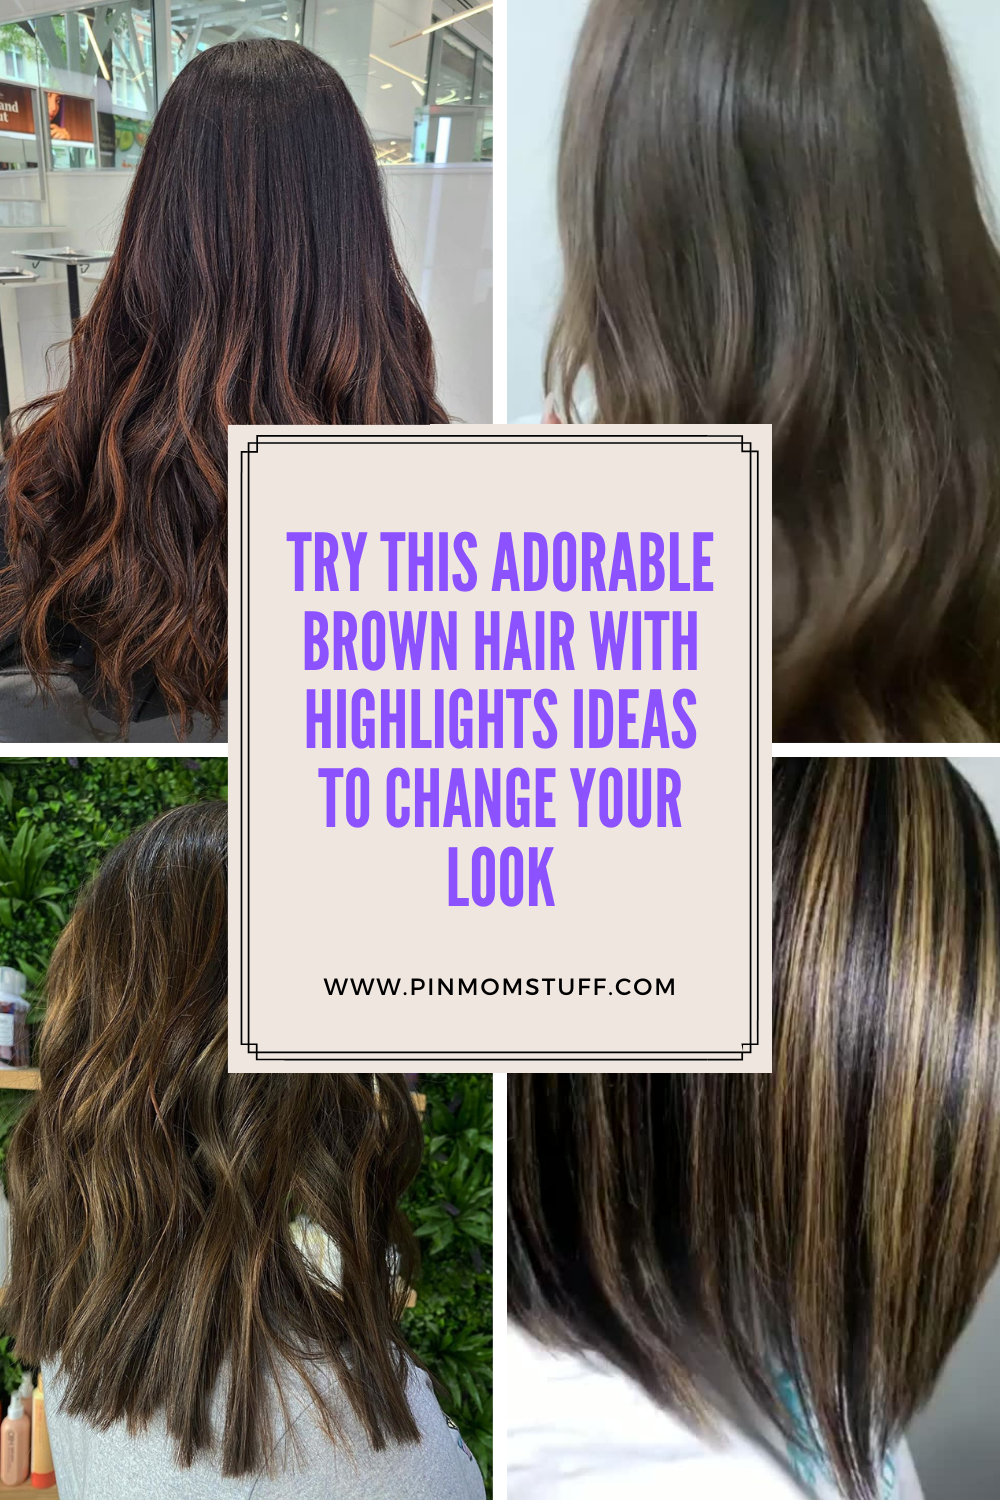 Try This Adorable Brown Hair With Highlights Ideas To Change Your Look